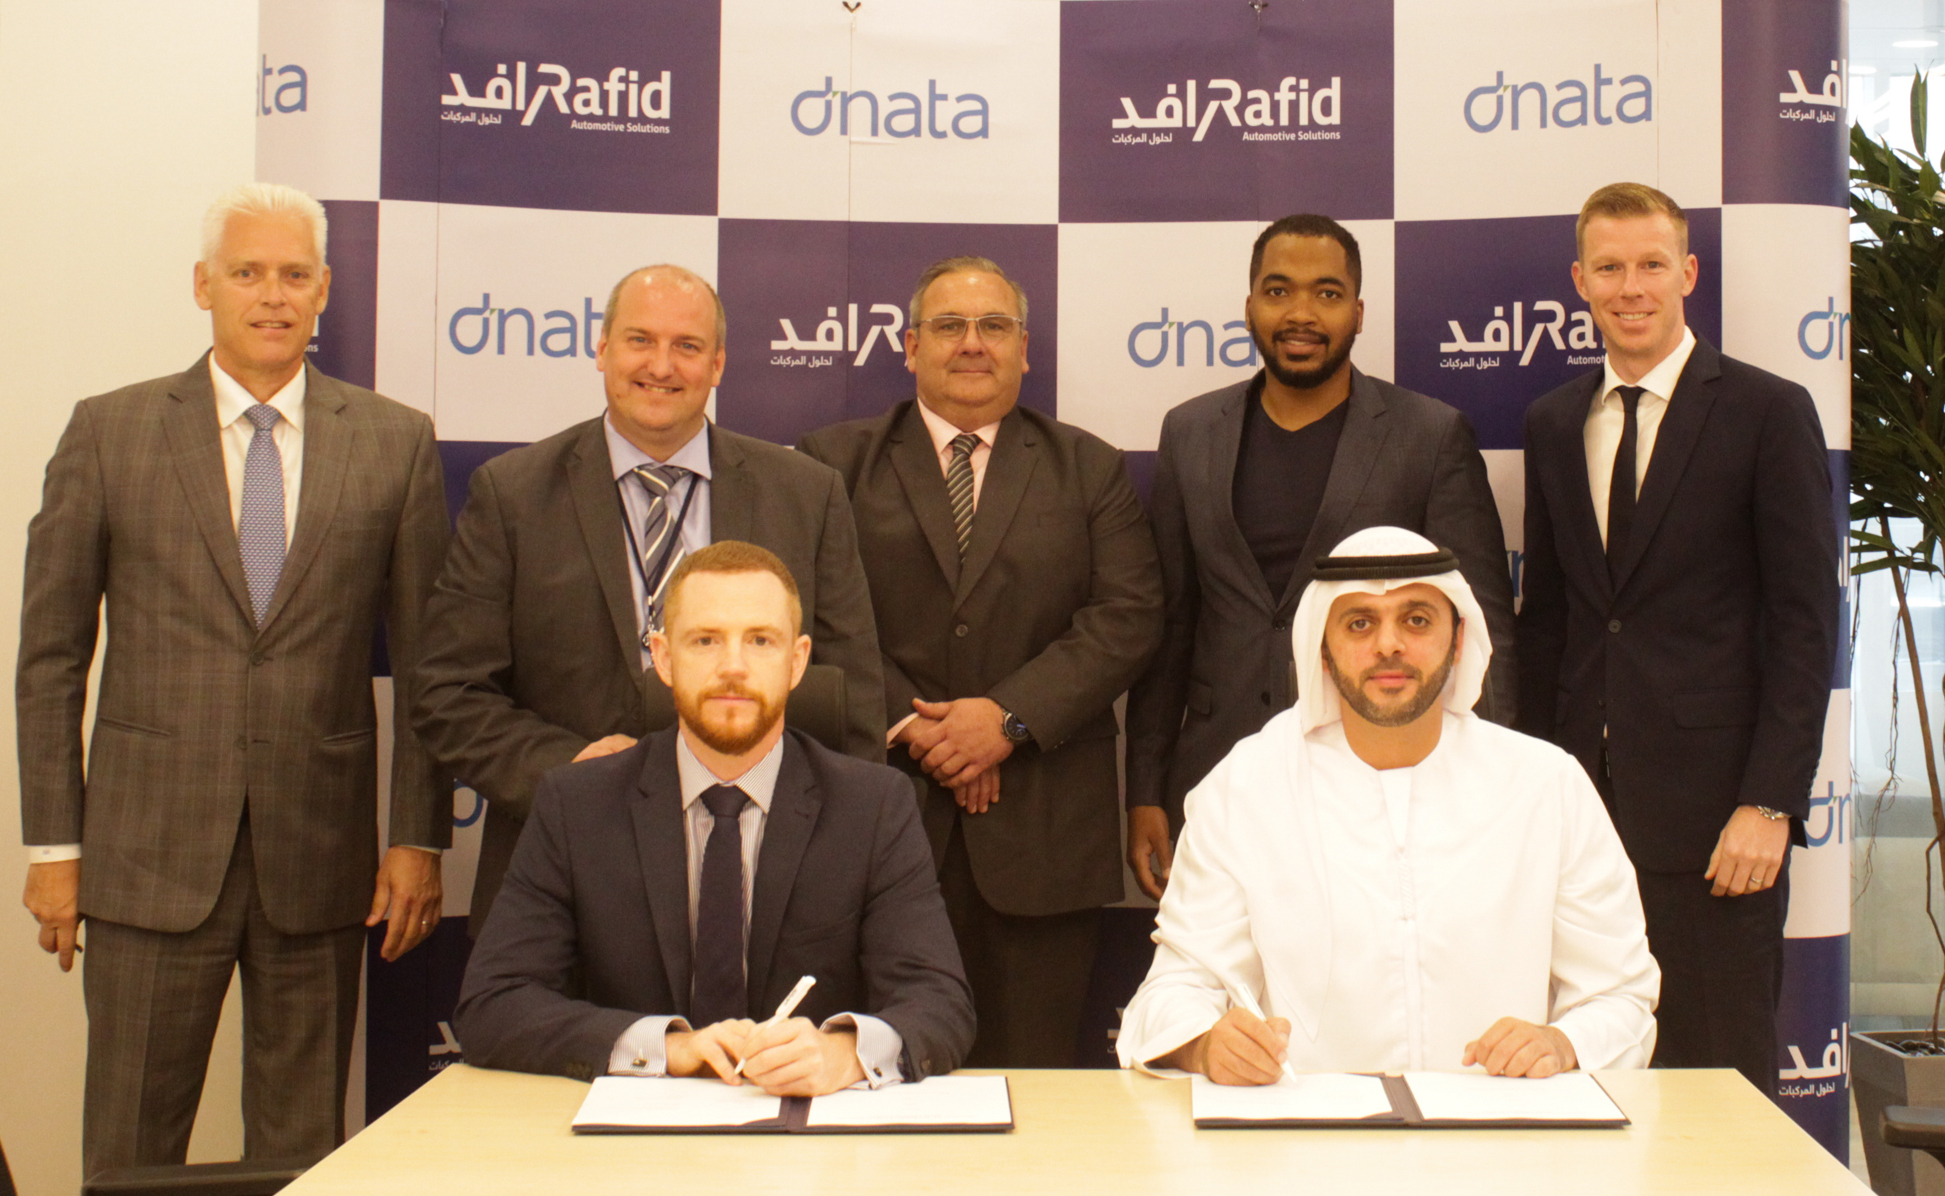 RAFID SIGNS 5 YEAR AGREEMENT WITH dnata (GSE)